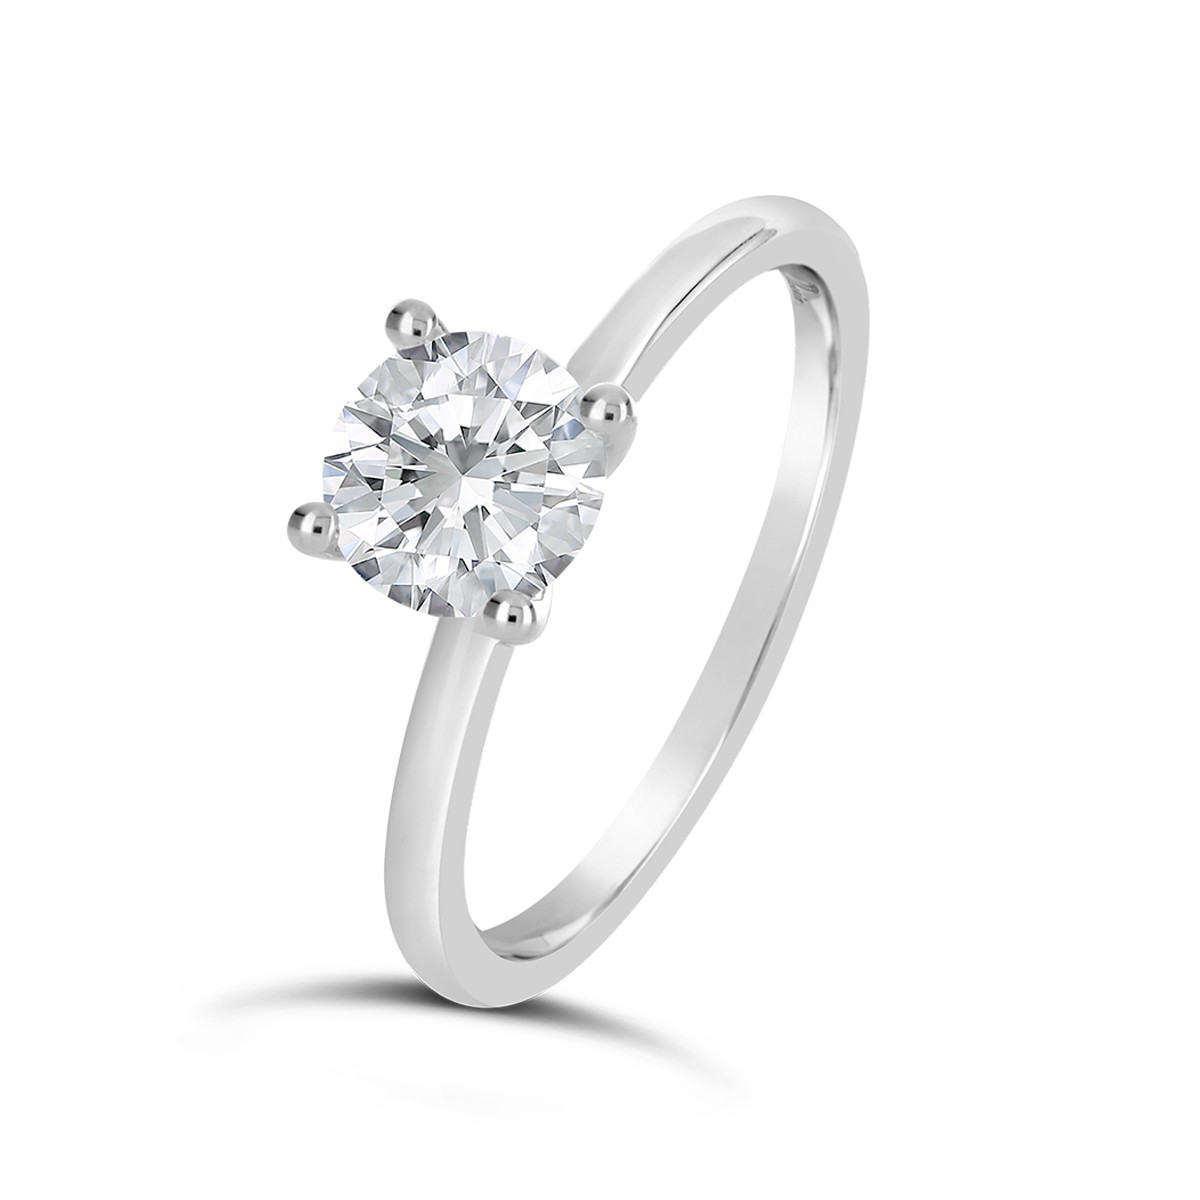 Classic Diamond Engagement Rings
 Classic Diamond Solitaire Engagement Ring Alessia